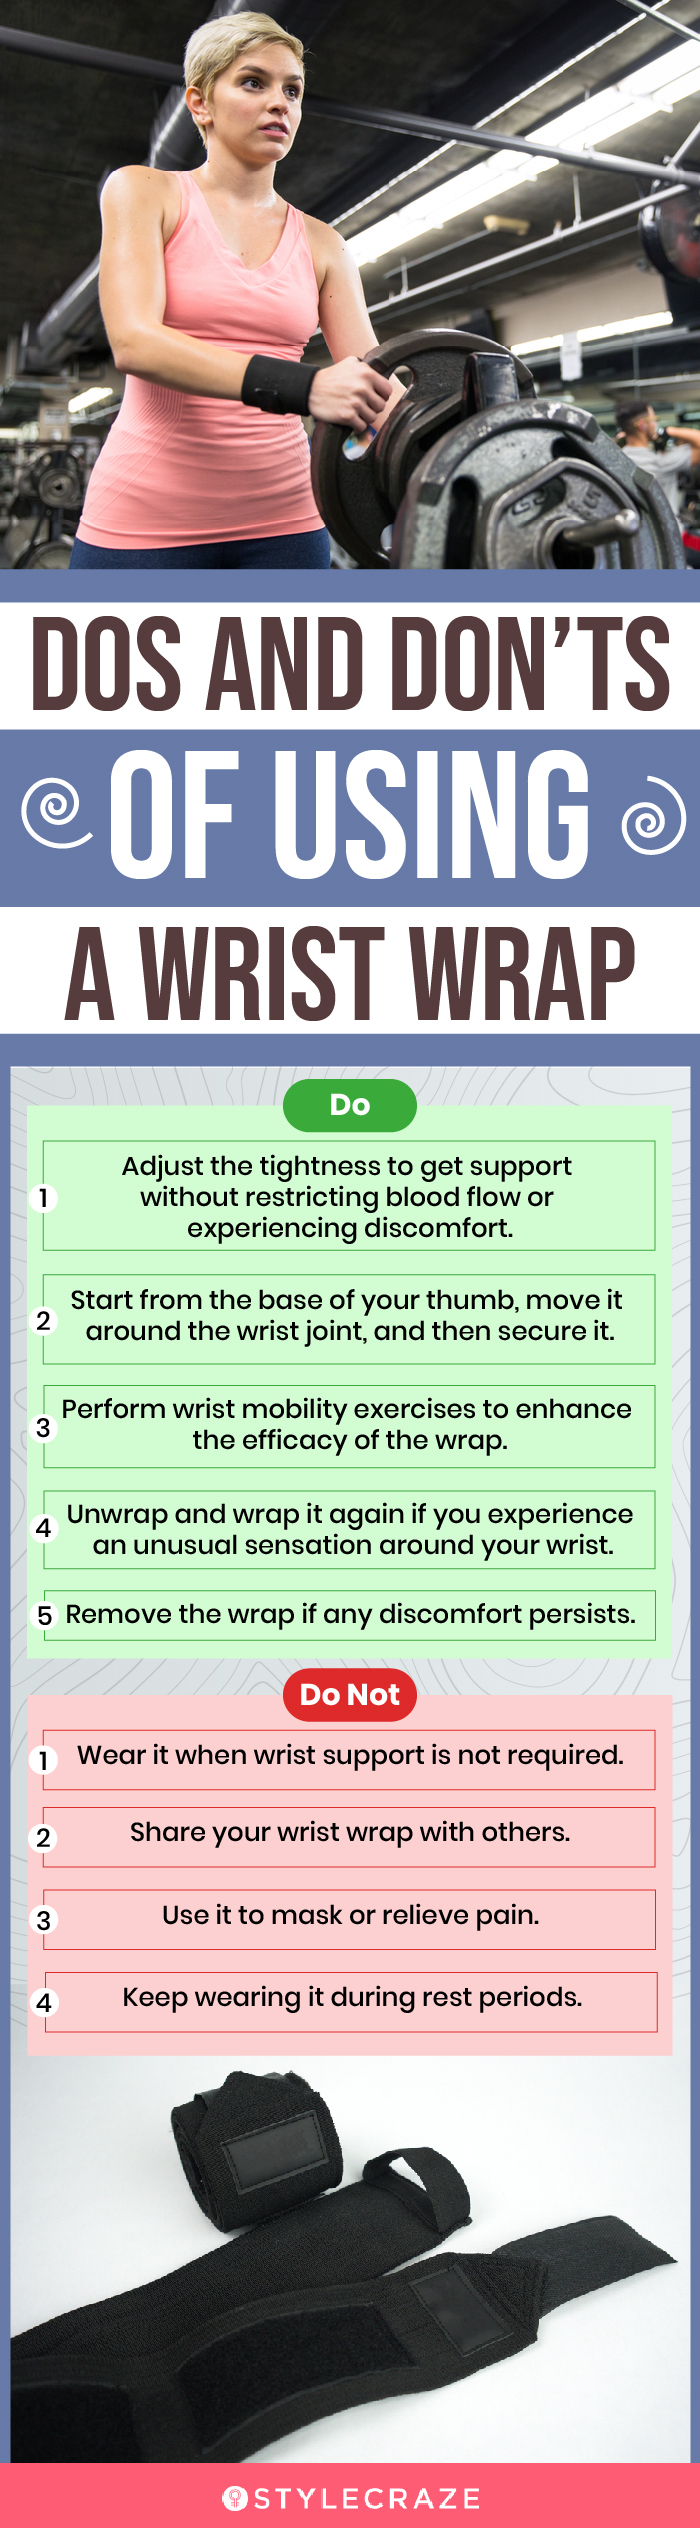 Dos And Don’ts Of Using A Wrist Wrap(infographic)